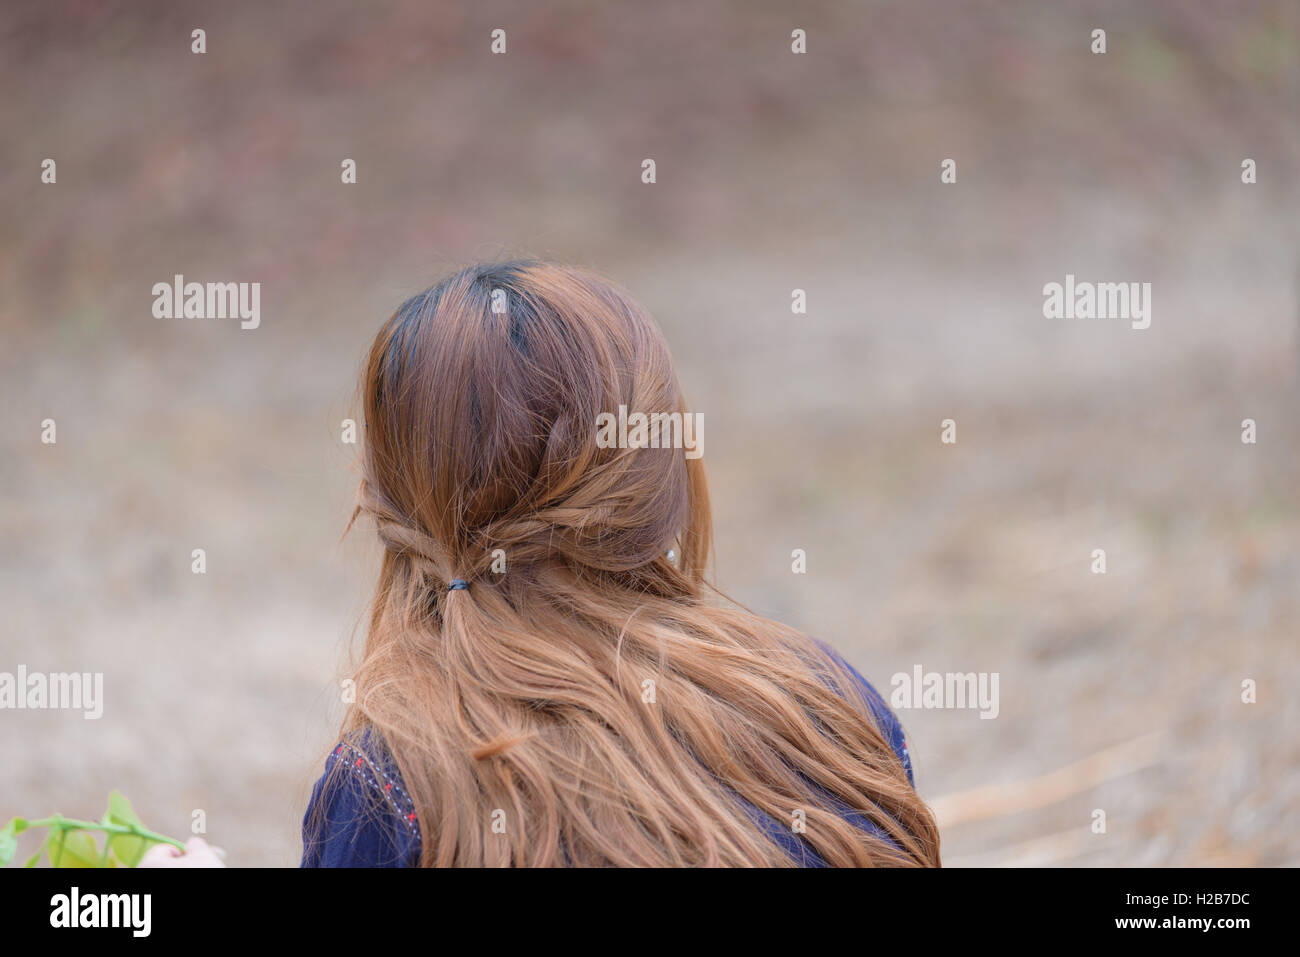 Back side of long colored hair lady. Stock Photo